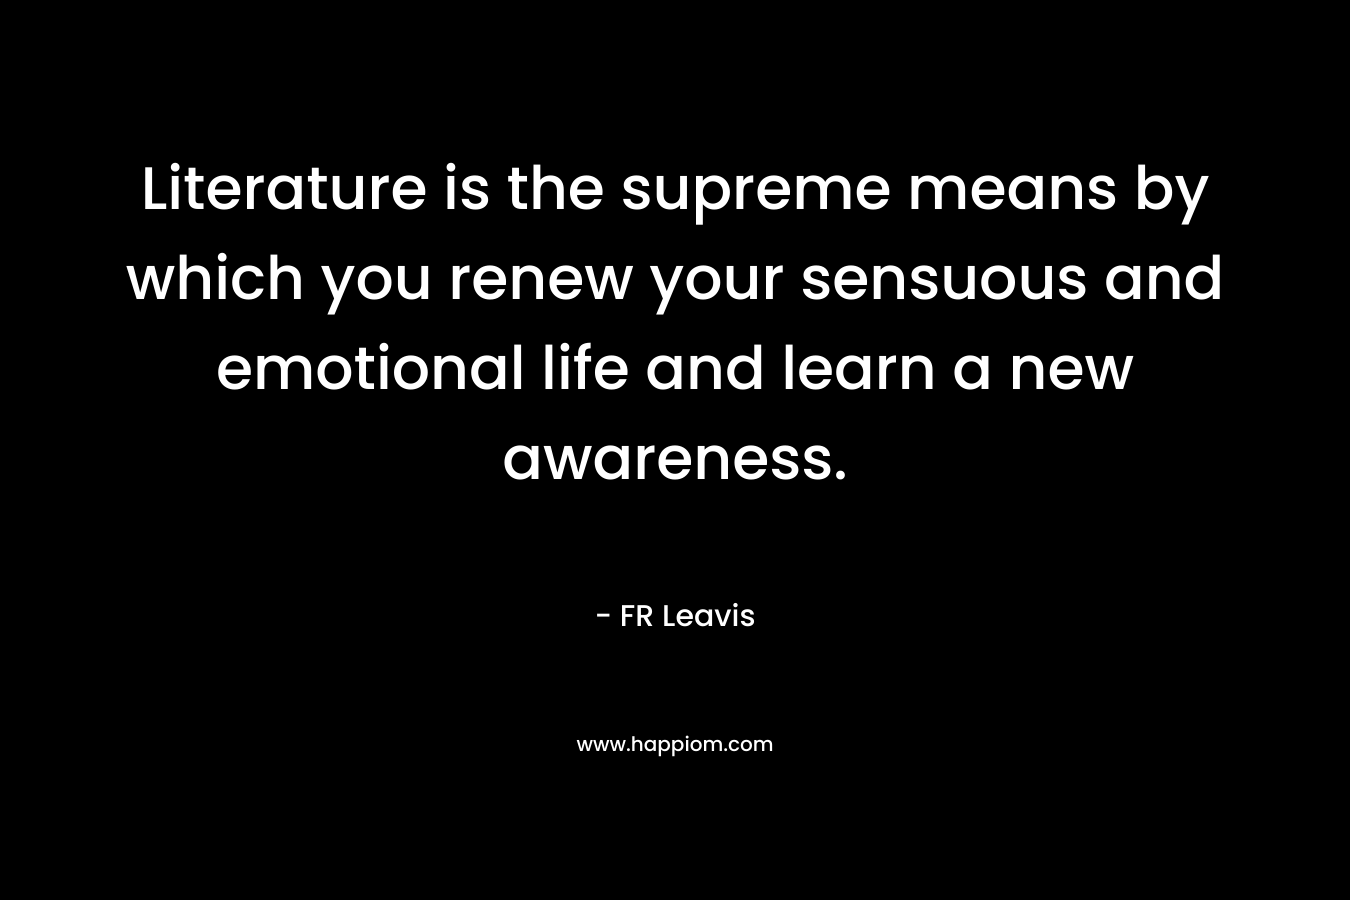 Literature is the supreme means by which you renew your sensuous and emotional life and learn a new awareness.